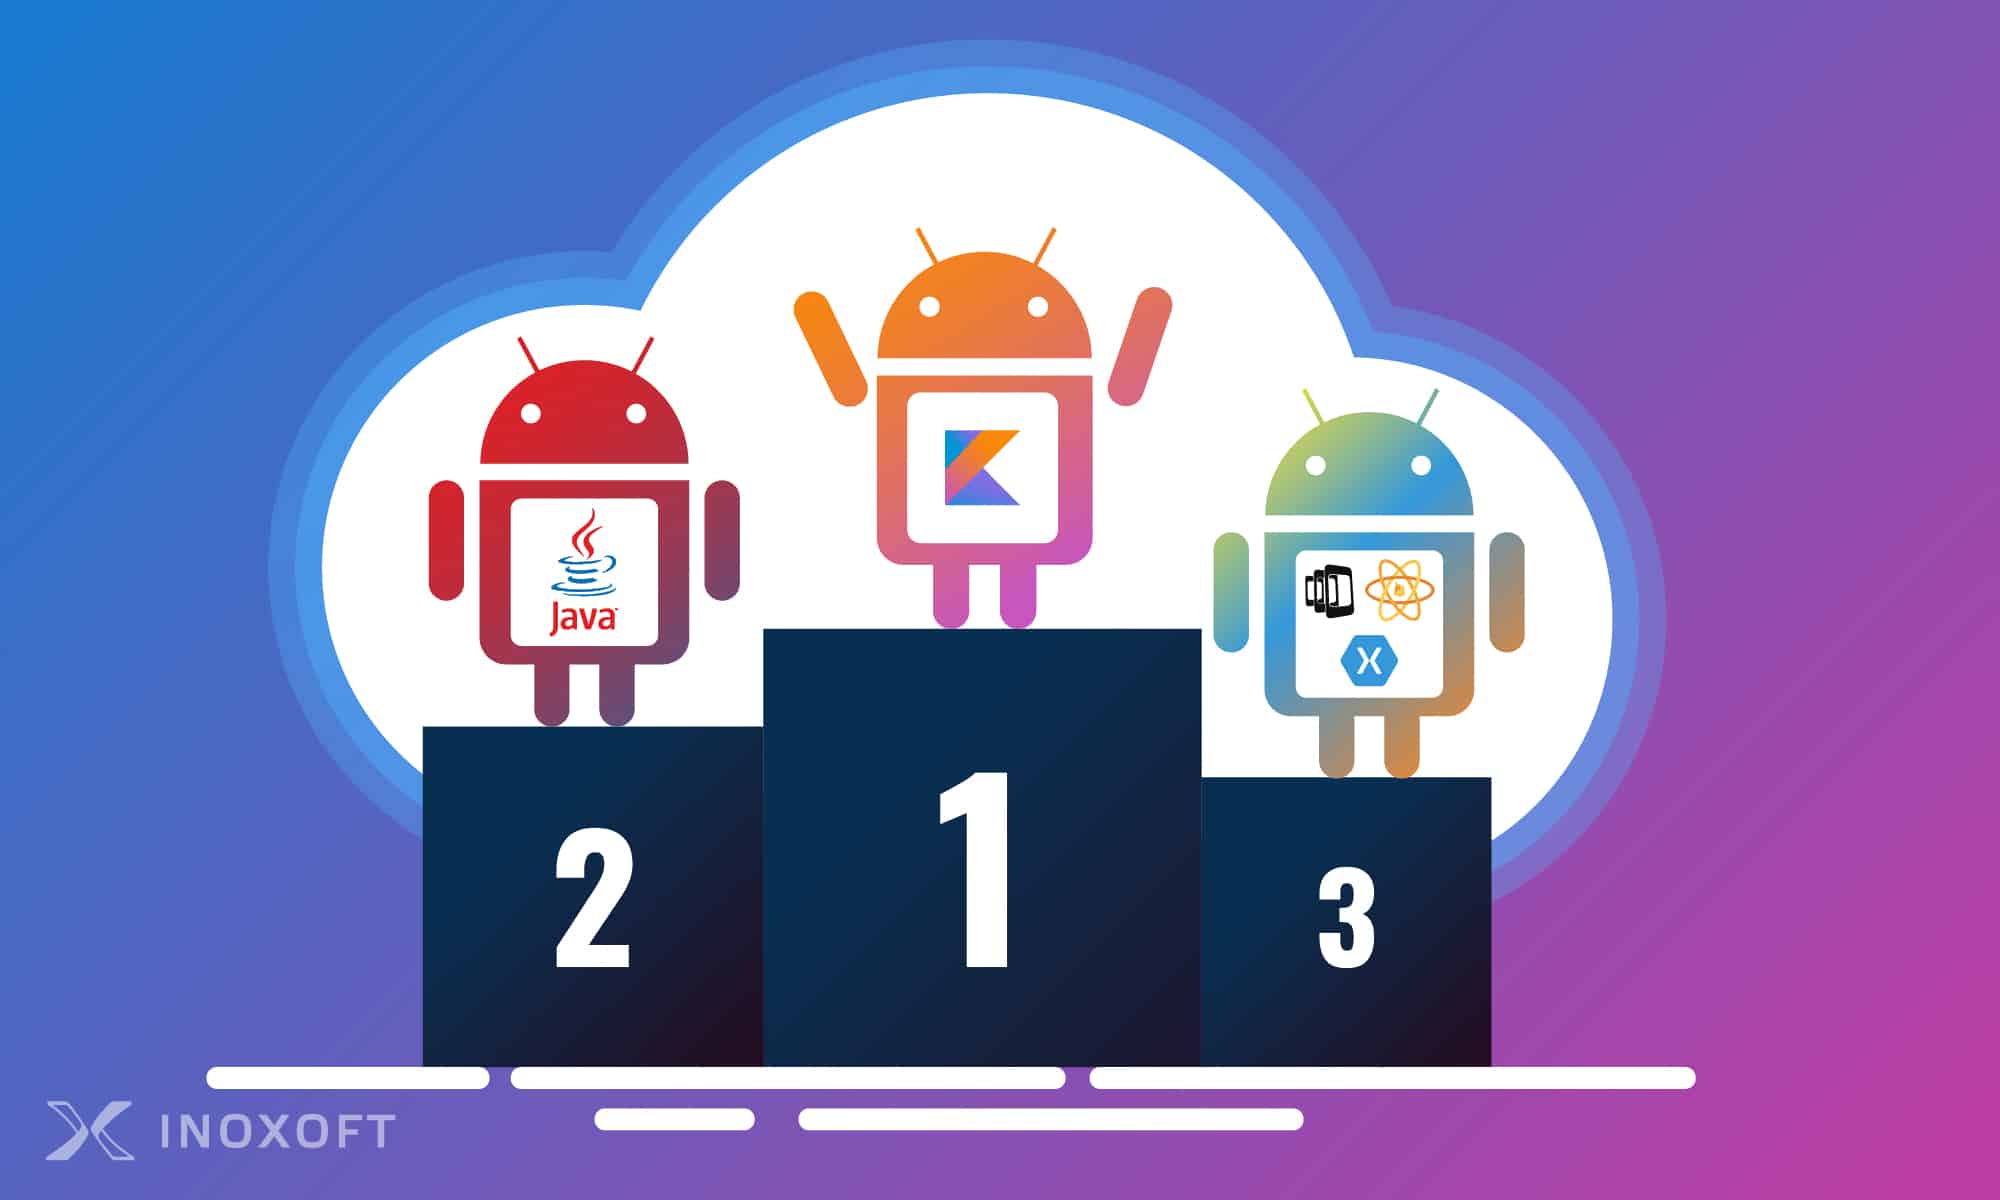 Reasons why Kotlin should be used in Android development